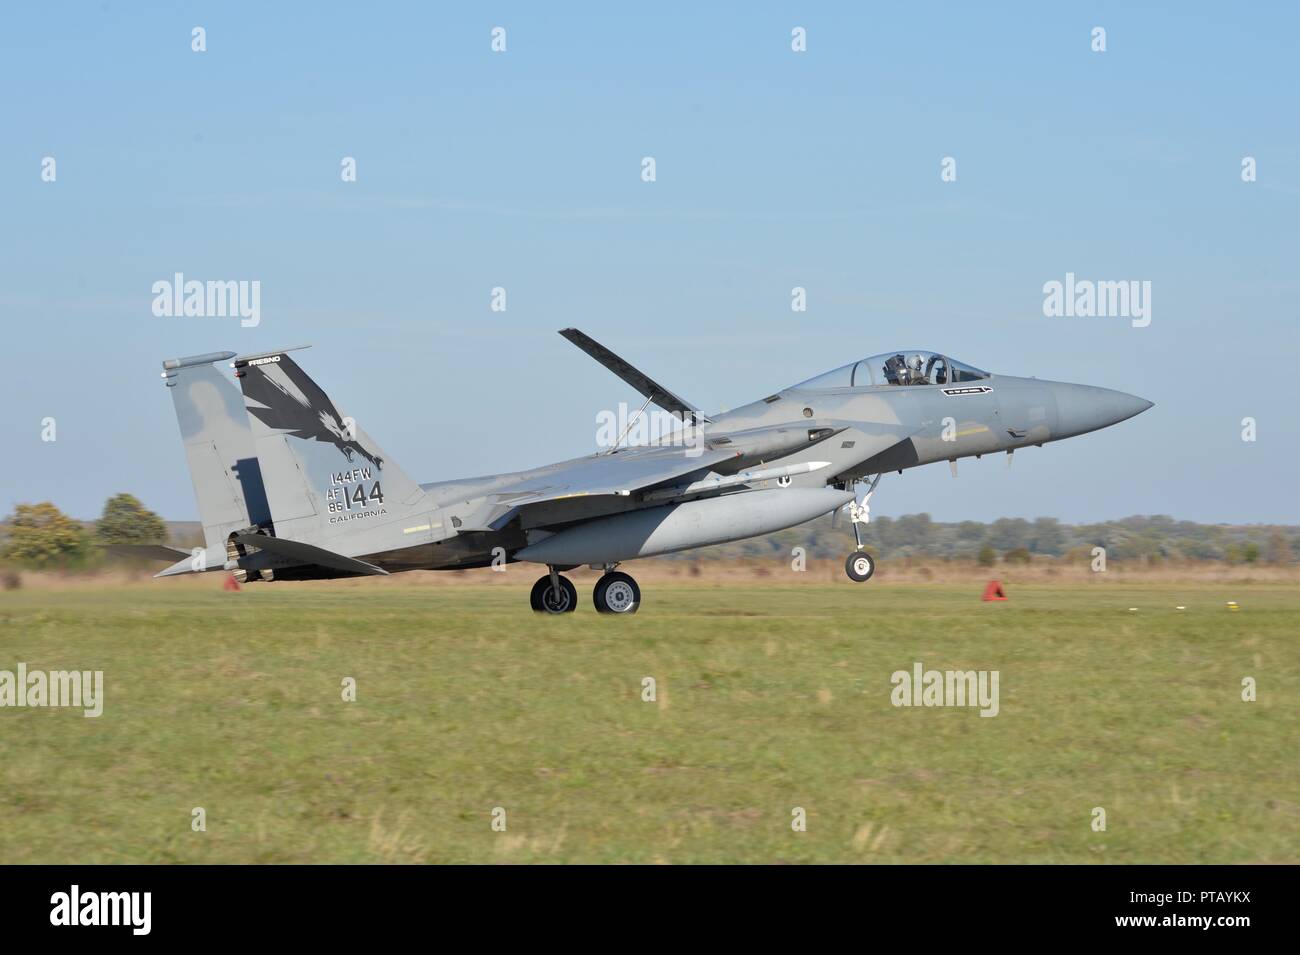 A U.S. Air Force F-15C Eagle fighter jet lands for the first time on Ukrainian soil during operation CLEAR SKY at Starokostiantyniv Air Base October 6, 2018 in Starokostiantyniv, Ukraine. The aircraft will participate in the largest NATO aviation exercise ever held in Ukraine. Stock Photo